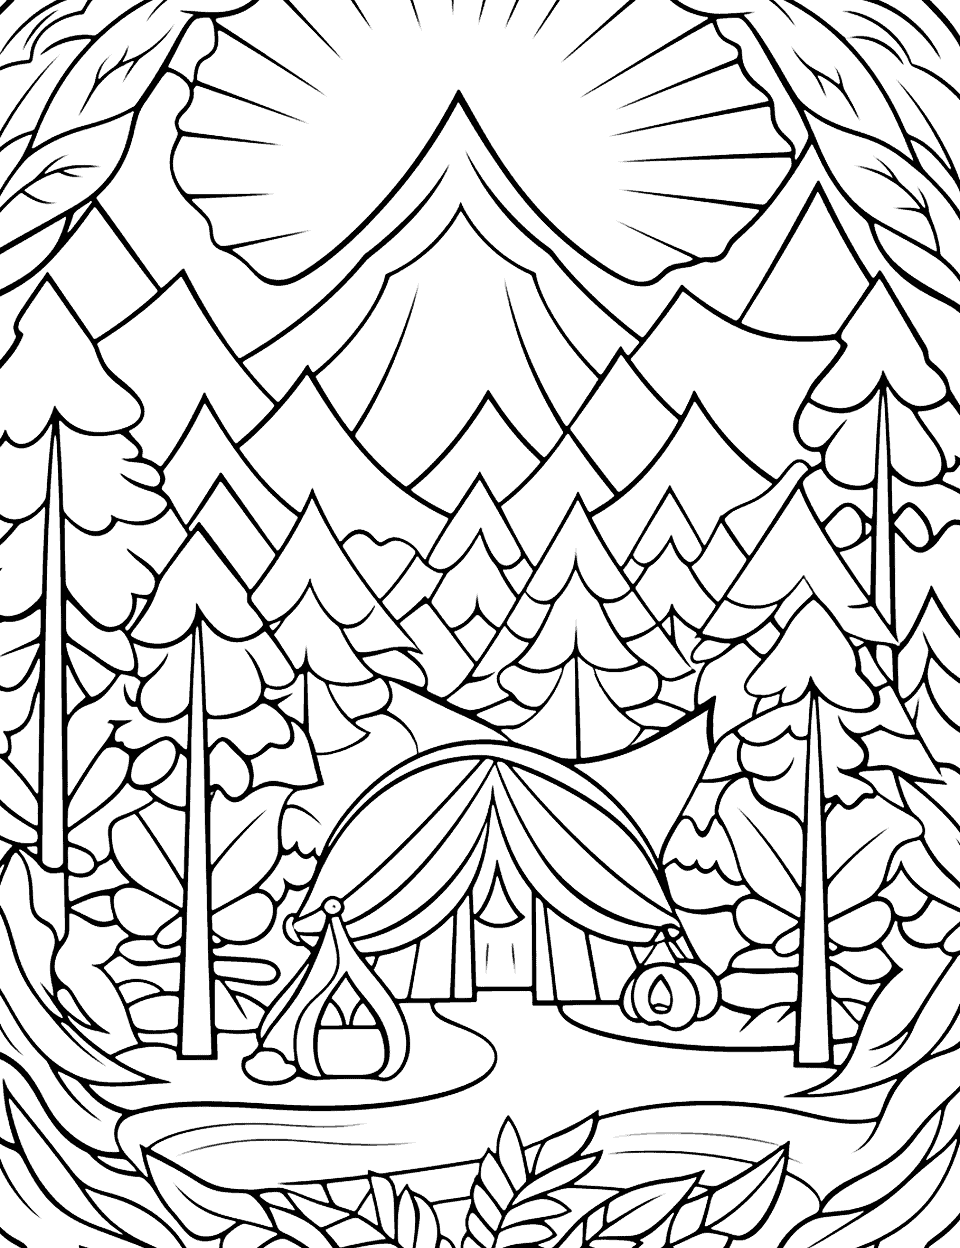 Forest Camping Adventure Adult Coloring Page - A forest camping scene featuring a tent, mountain, trees, and outdoor elements.